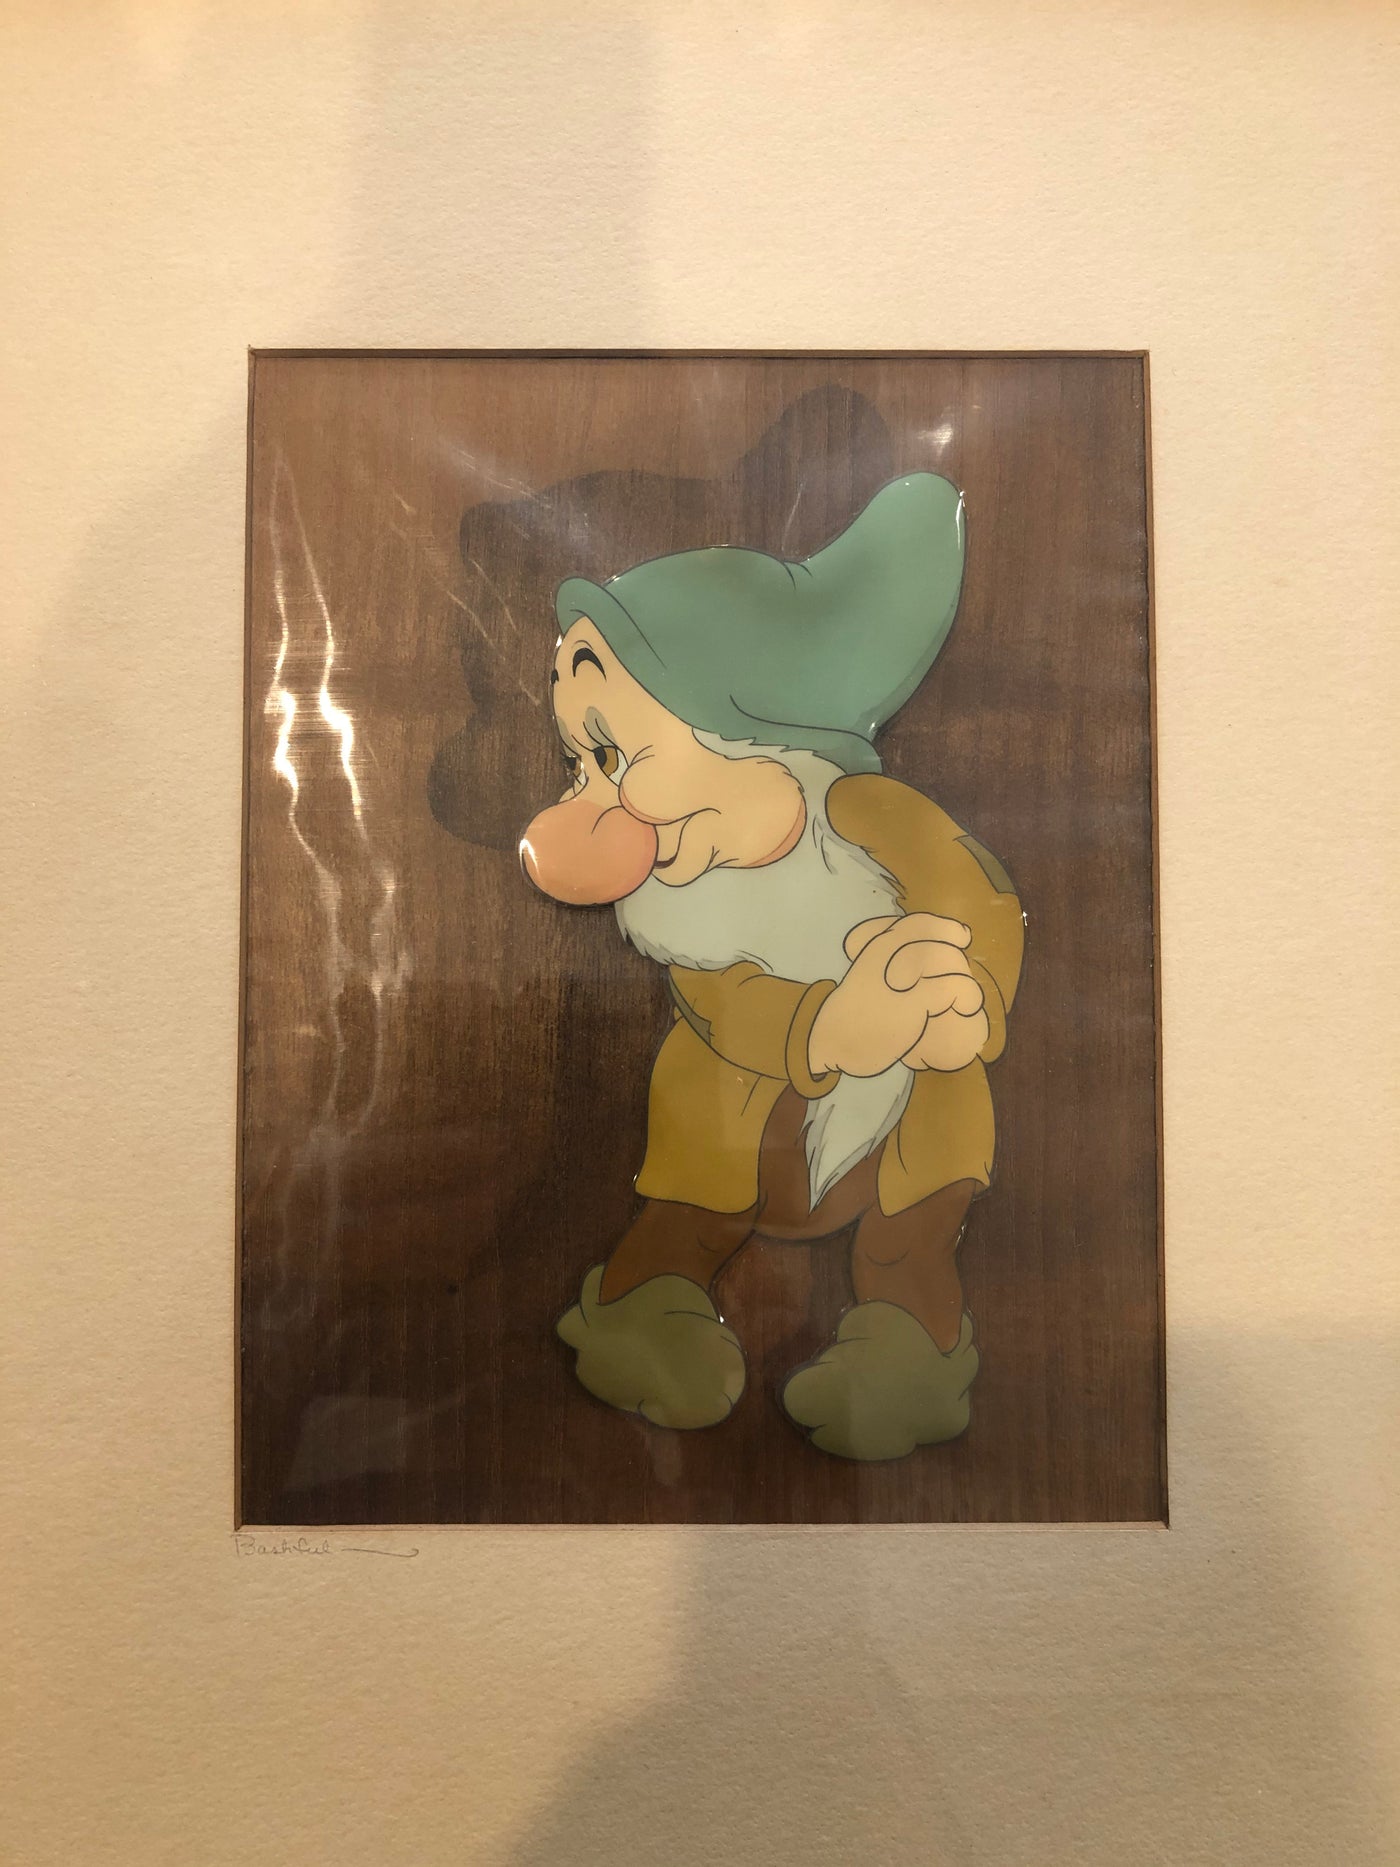 Original Walt Disney Production Cel on Courvoisier Background of Bashful from Snow White and the Seven Dwarfs